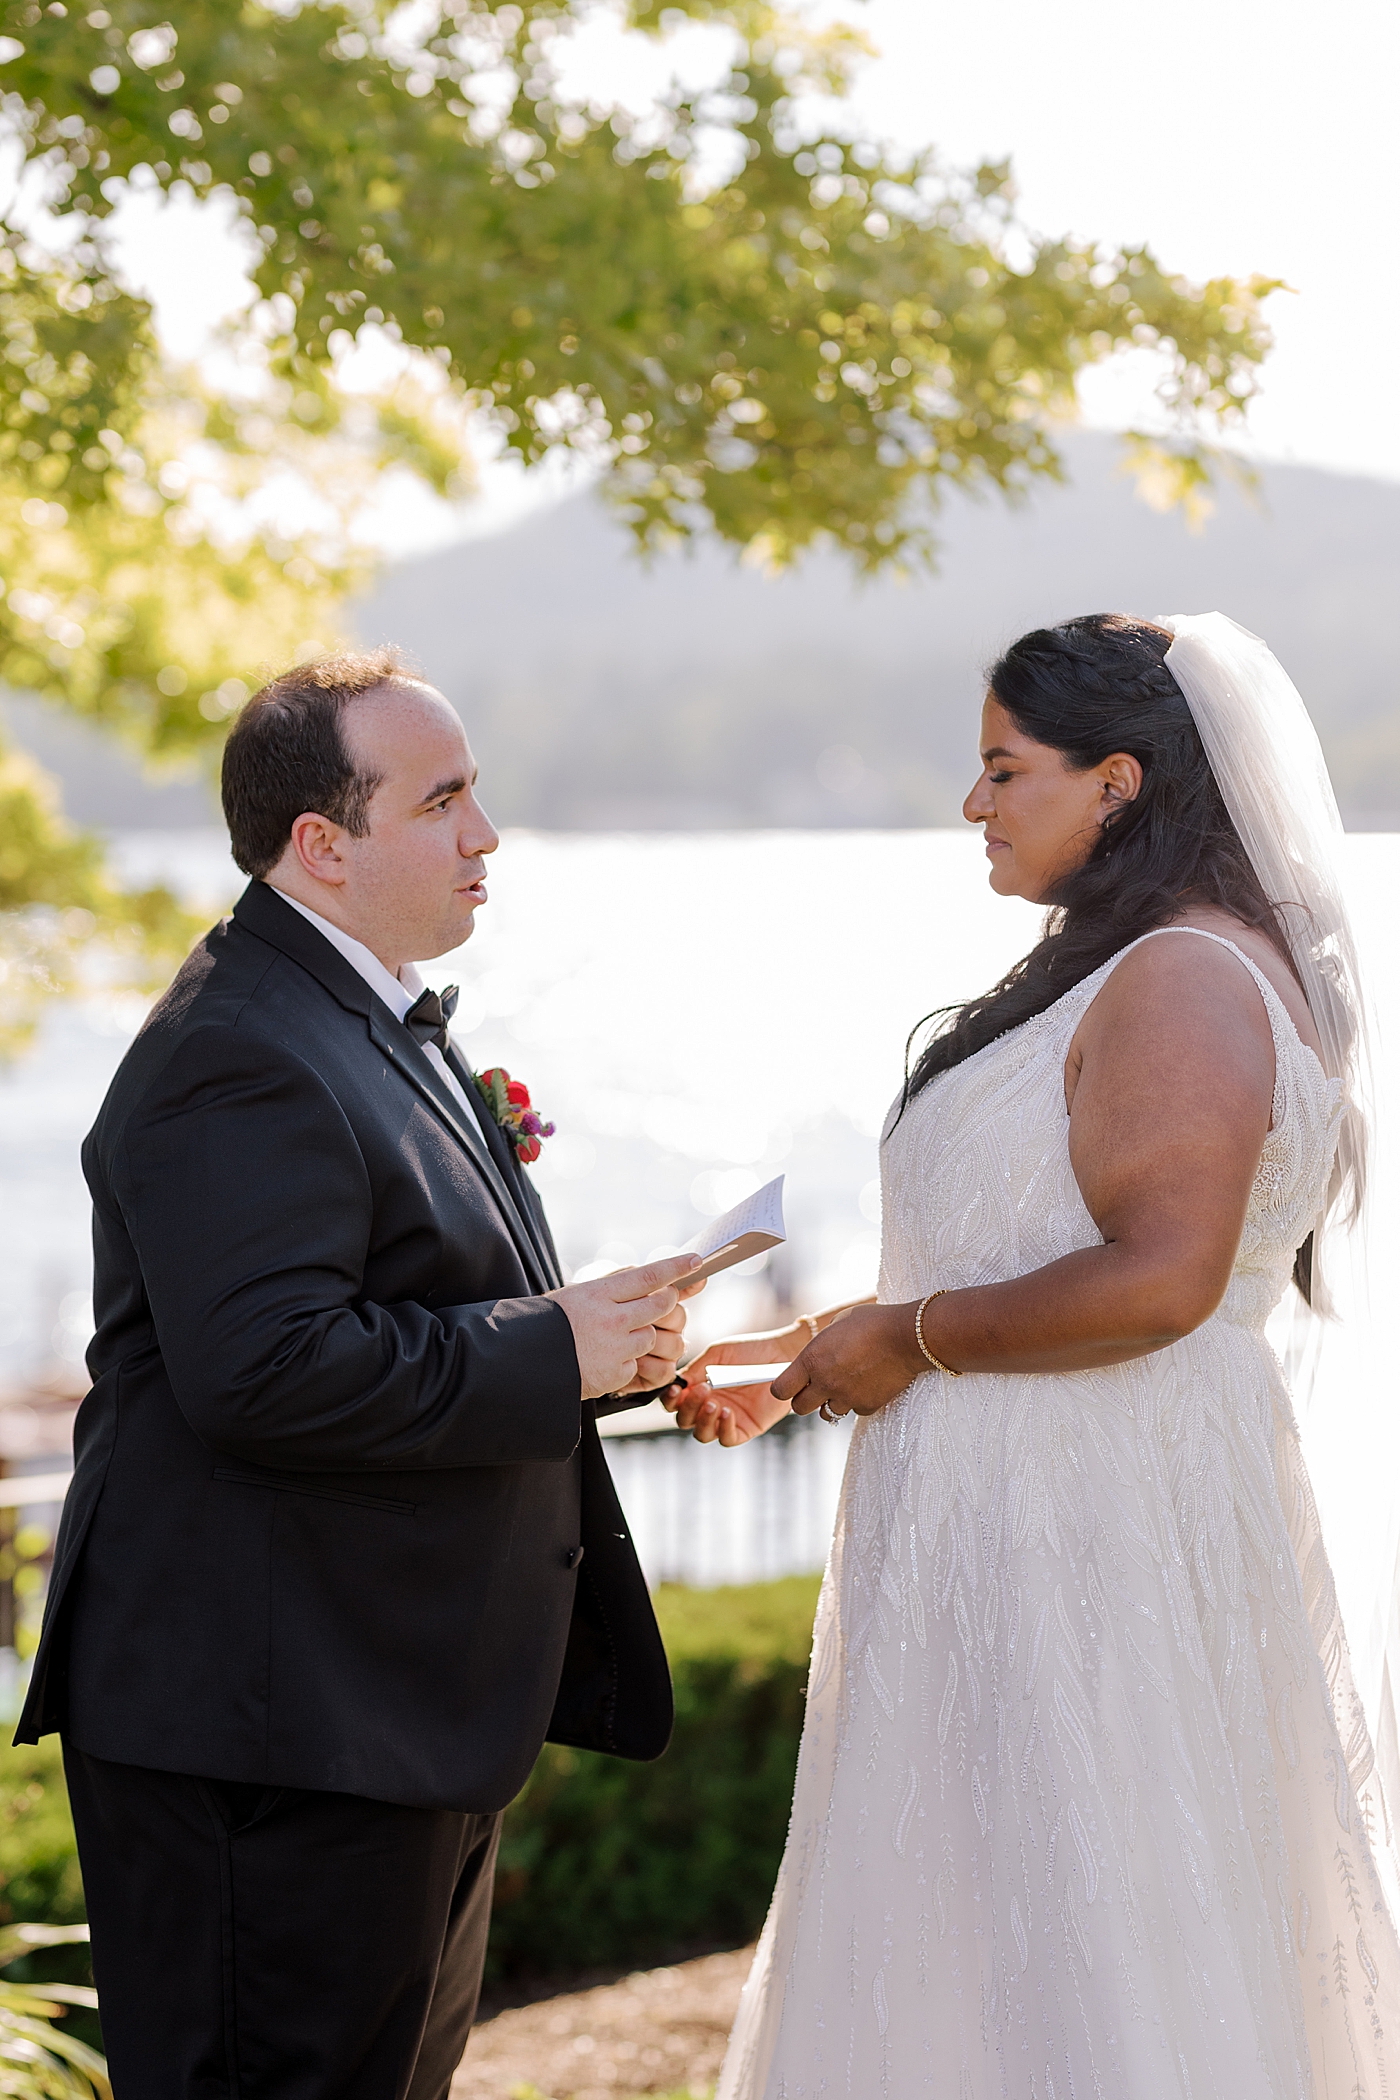 Image of bride and groom reading vows to each other | Image by Hope Helmuth Photography